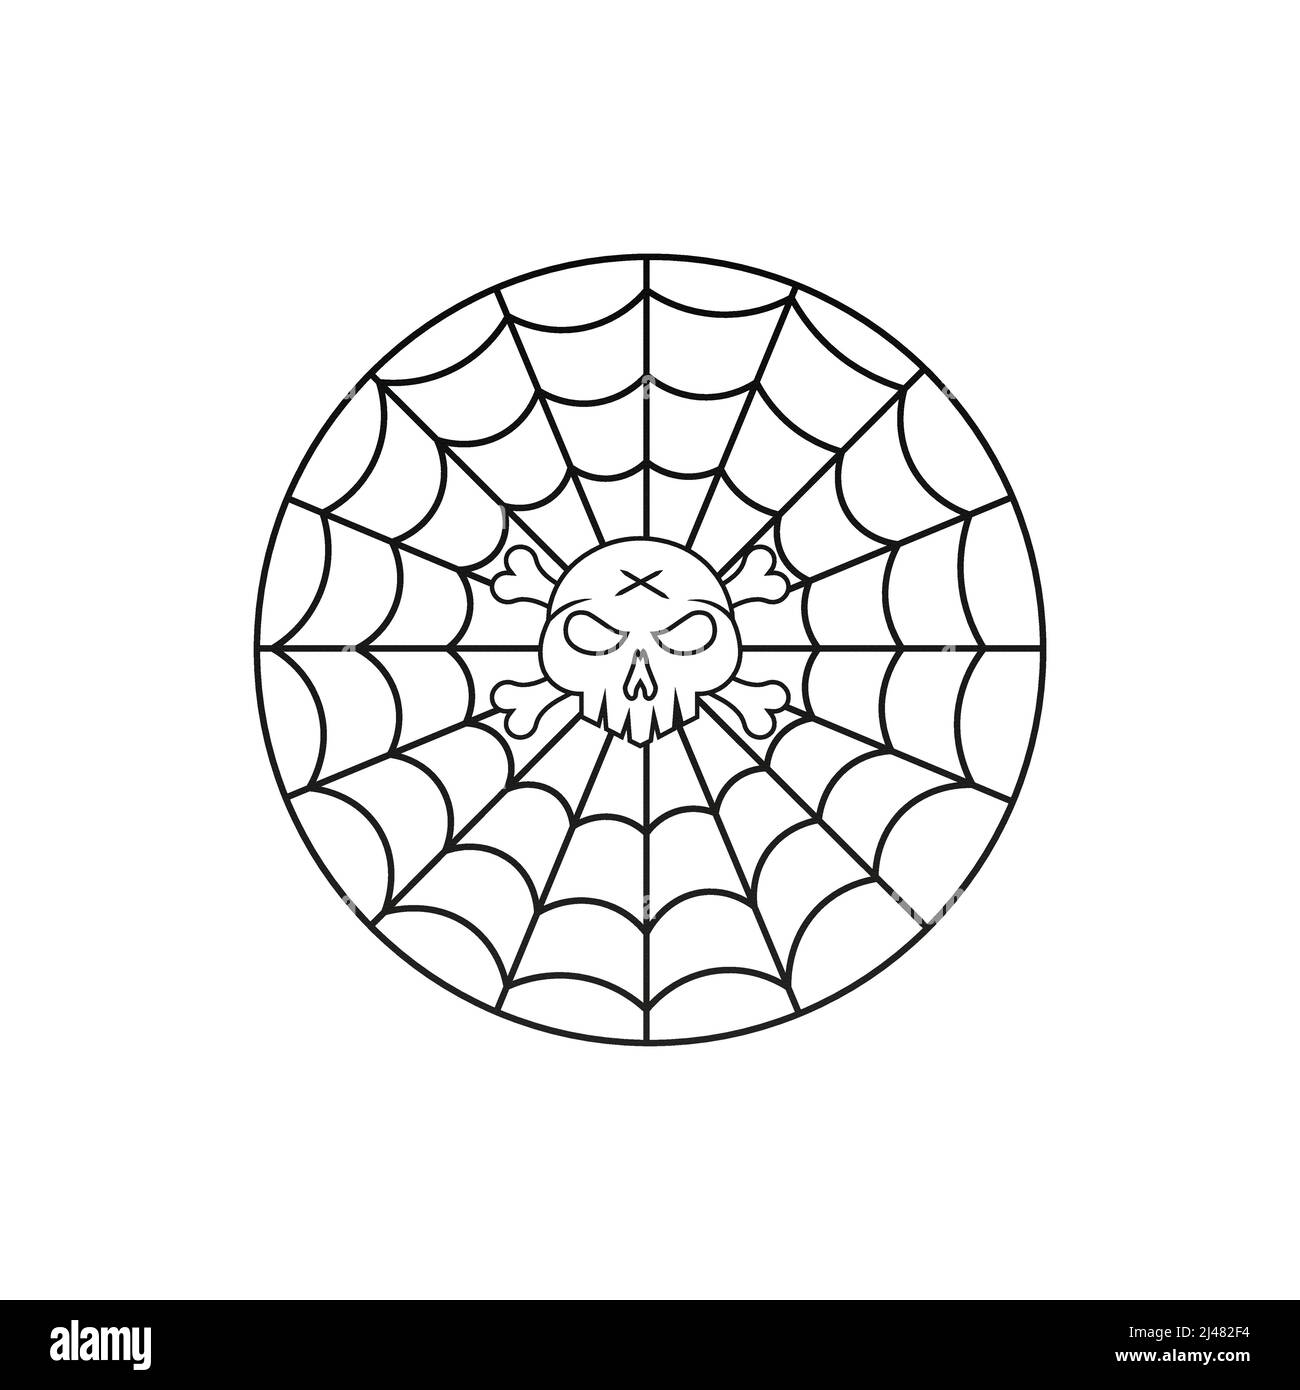 Spider skull logo design template. This logo is very suitable for any kind of business or industry that is engaged in any field. Stock Vector